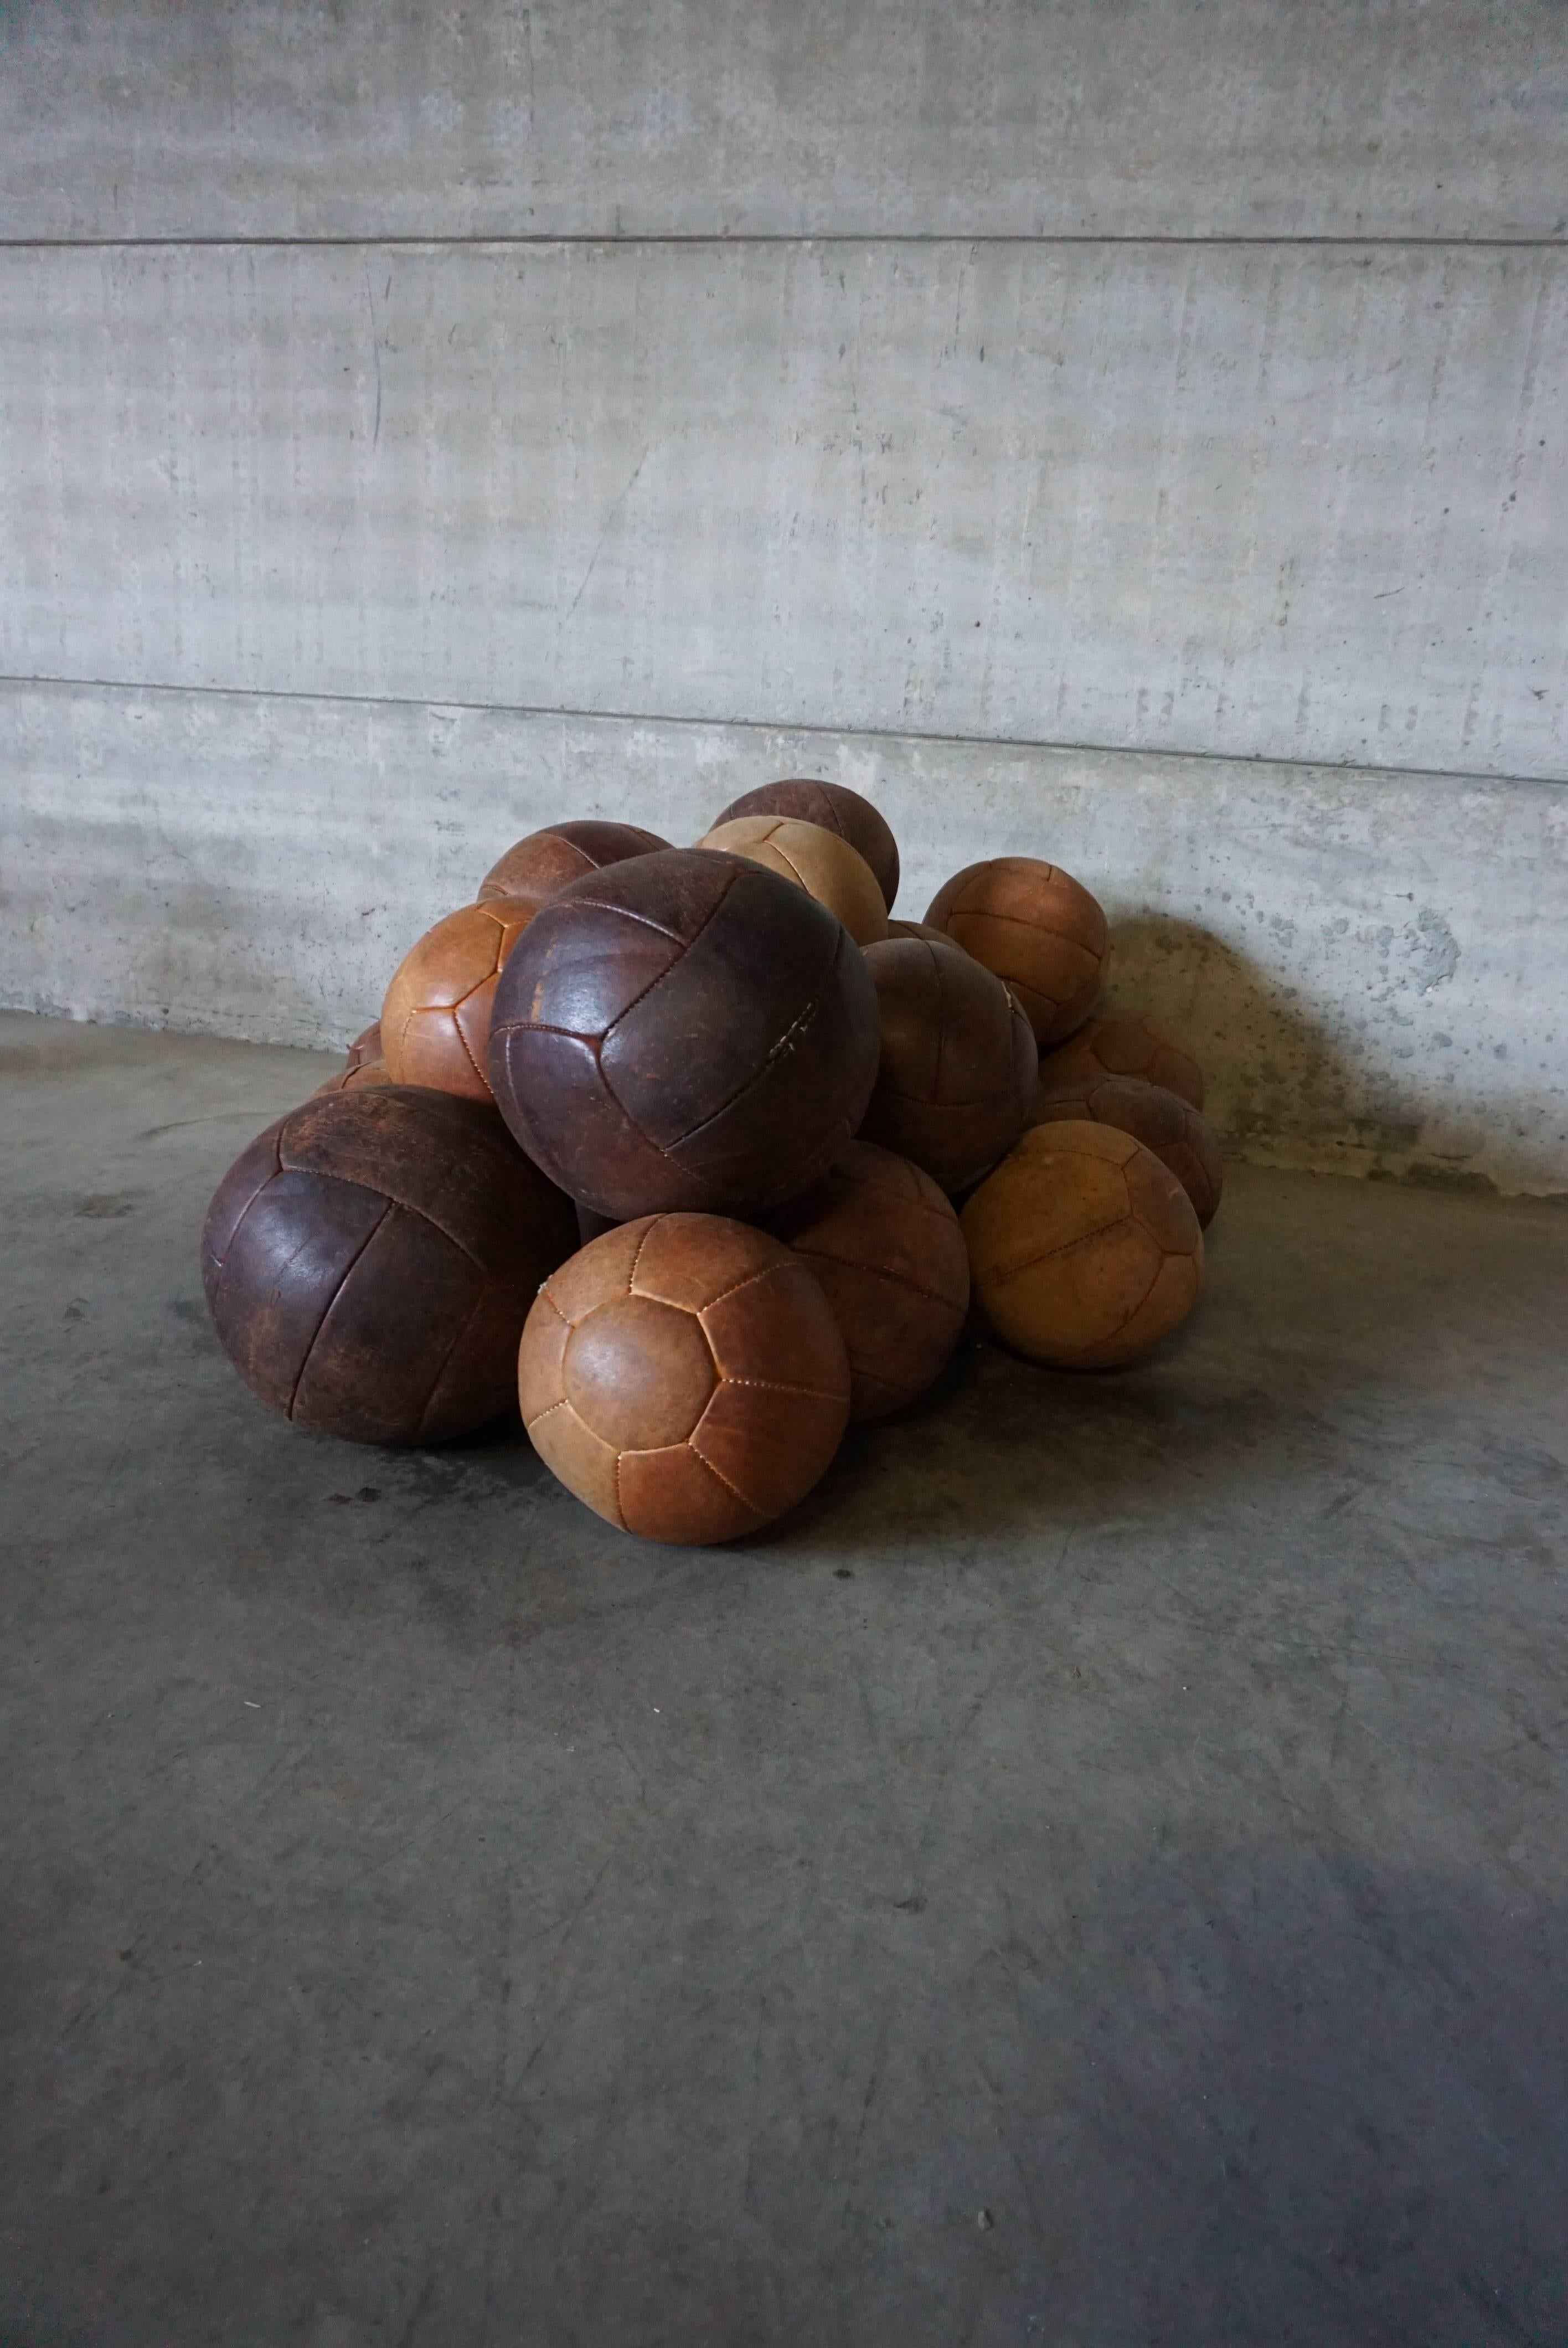 A nice collection of 25 1940s European exercise balls. Ranging in size and color tones of brown, beige and cognac, these items would make an excellent collection or a Stand alone object d'art. The leather has a nice patina.